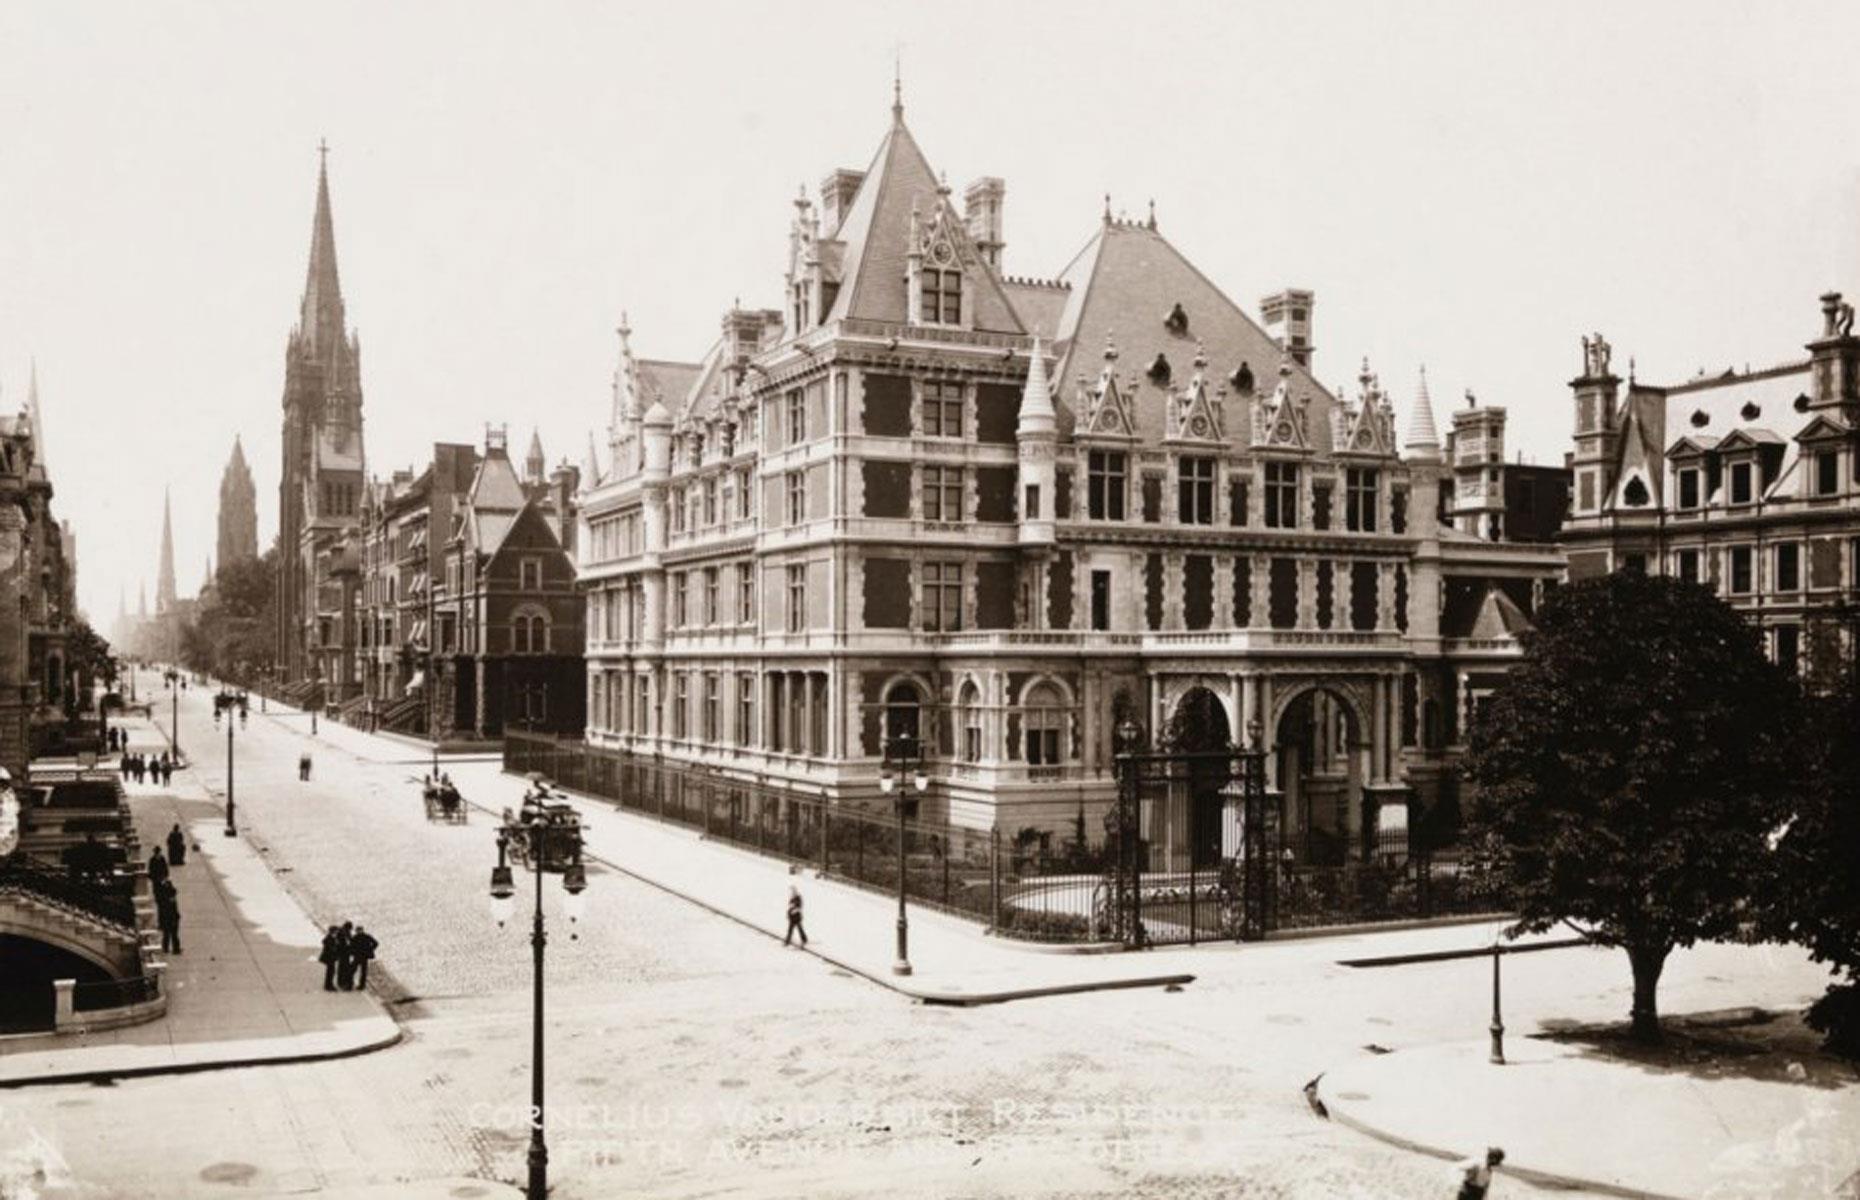 <p>Cornelius Vanderbilt II, widely acknowledged to be the patriarch's favourite child, set his sights on building the largest and most opulent home in New York City.</p>  <p>From its vantage point on the coveted northwest corner of 5th Avenue and West 57th Street – a location which first required the purchasing and subsequent demolishing of three extant brownstones – the new home was designed to command attention, as well as to “dwarf” the Petit Chateau designed by sister-in-law Alva Vanderbilt, with whom Cornelius’ wife Alice was in steep competition.</p>